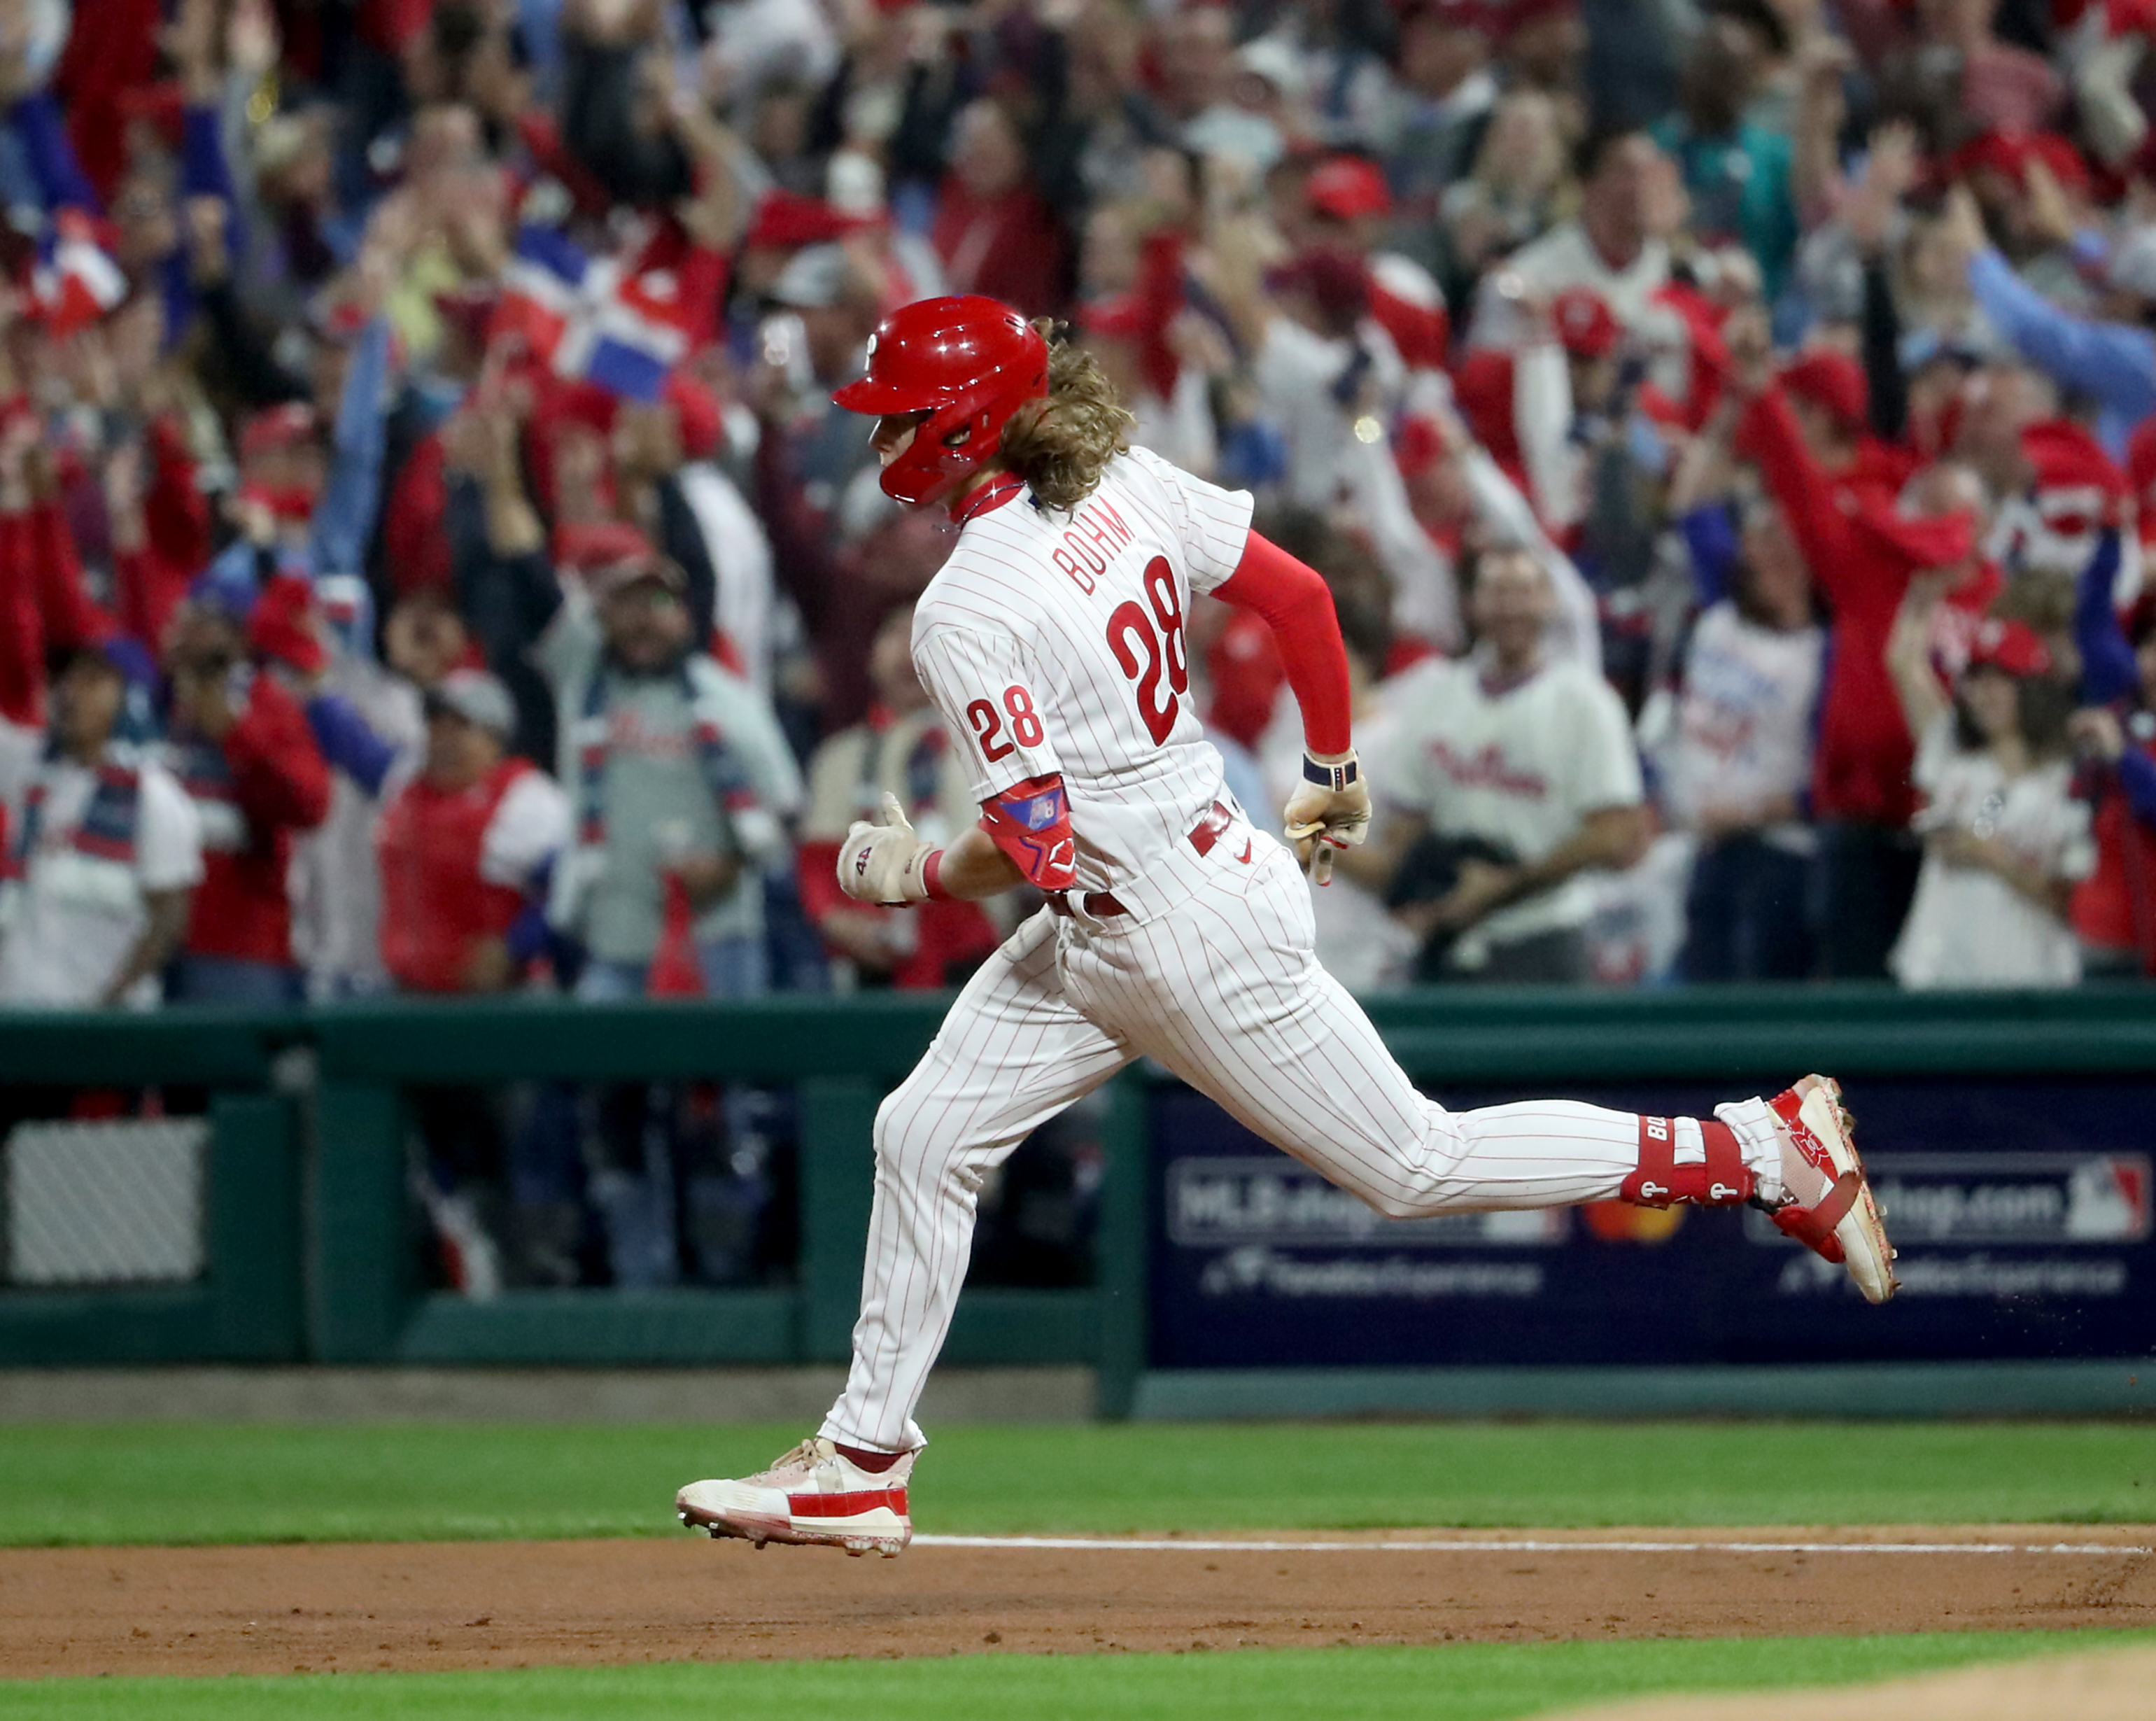 Alec Bohm (28) of the Philadelphia Phillies hits a home run in the second inning during World Series Game 3 against the Houston Astros at Citizens Bank Park, Tuesday, Nov. 1, 2022. The home run gave the Phillies a 3-0 lead.